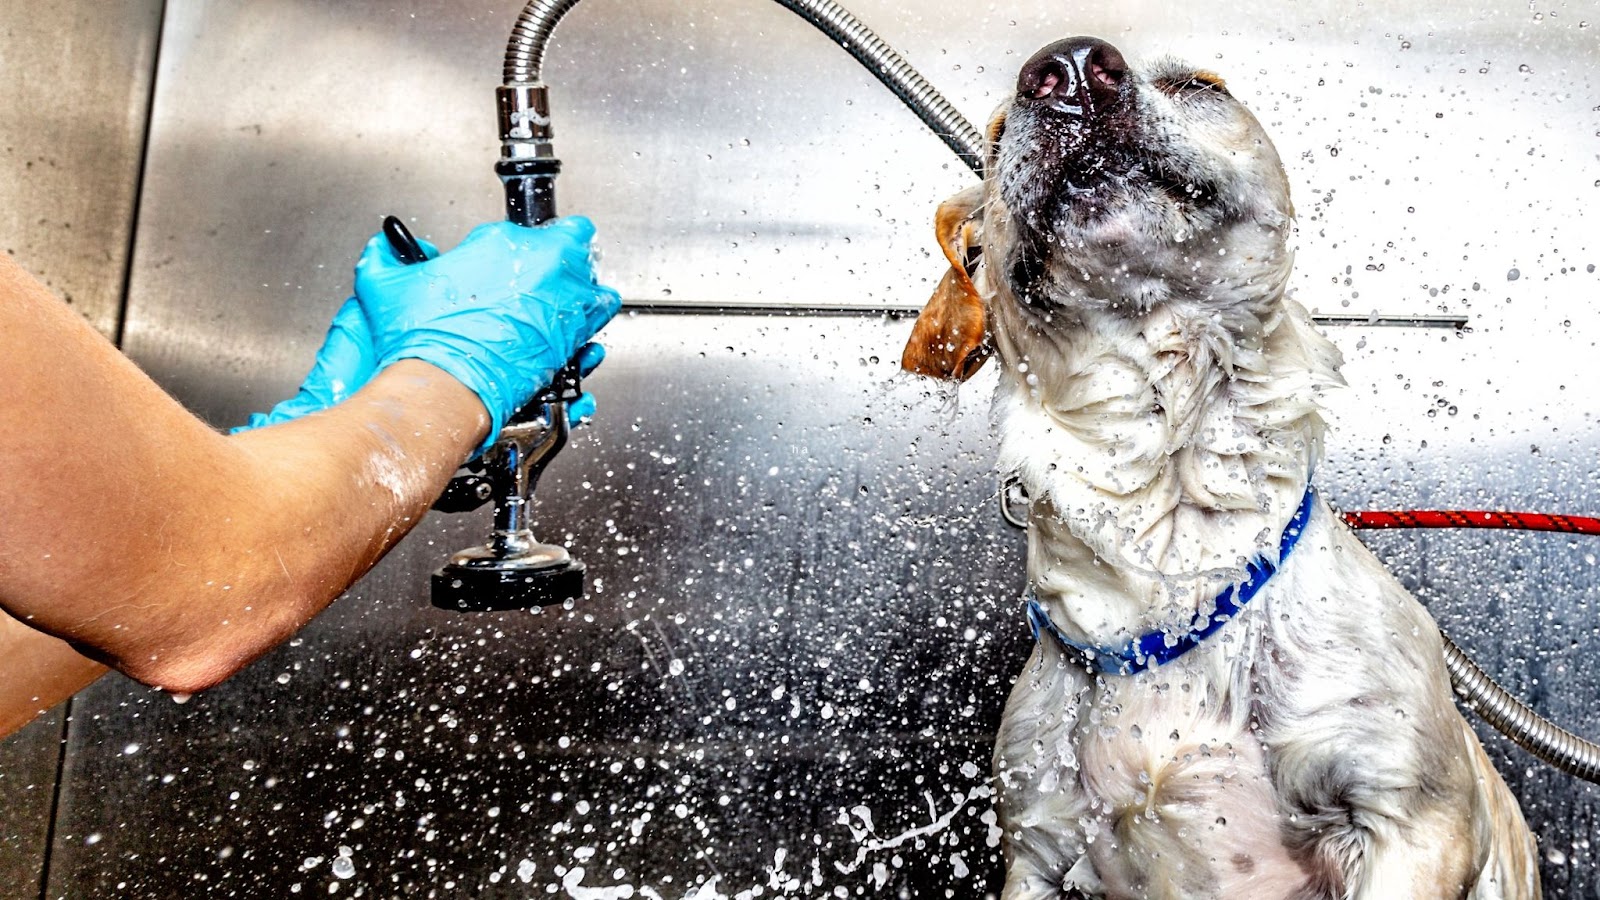 Large Labrador dog getting bathed in dog parlor how long will it take